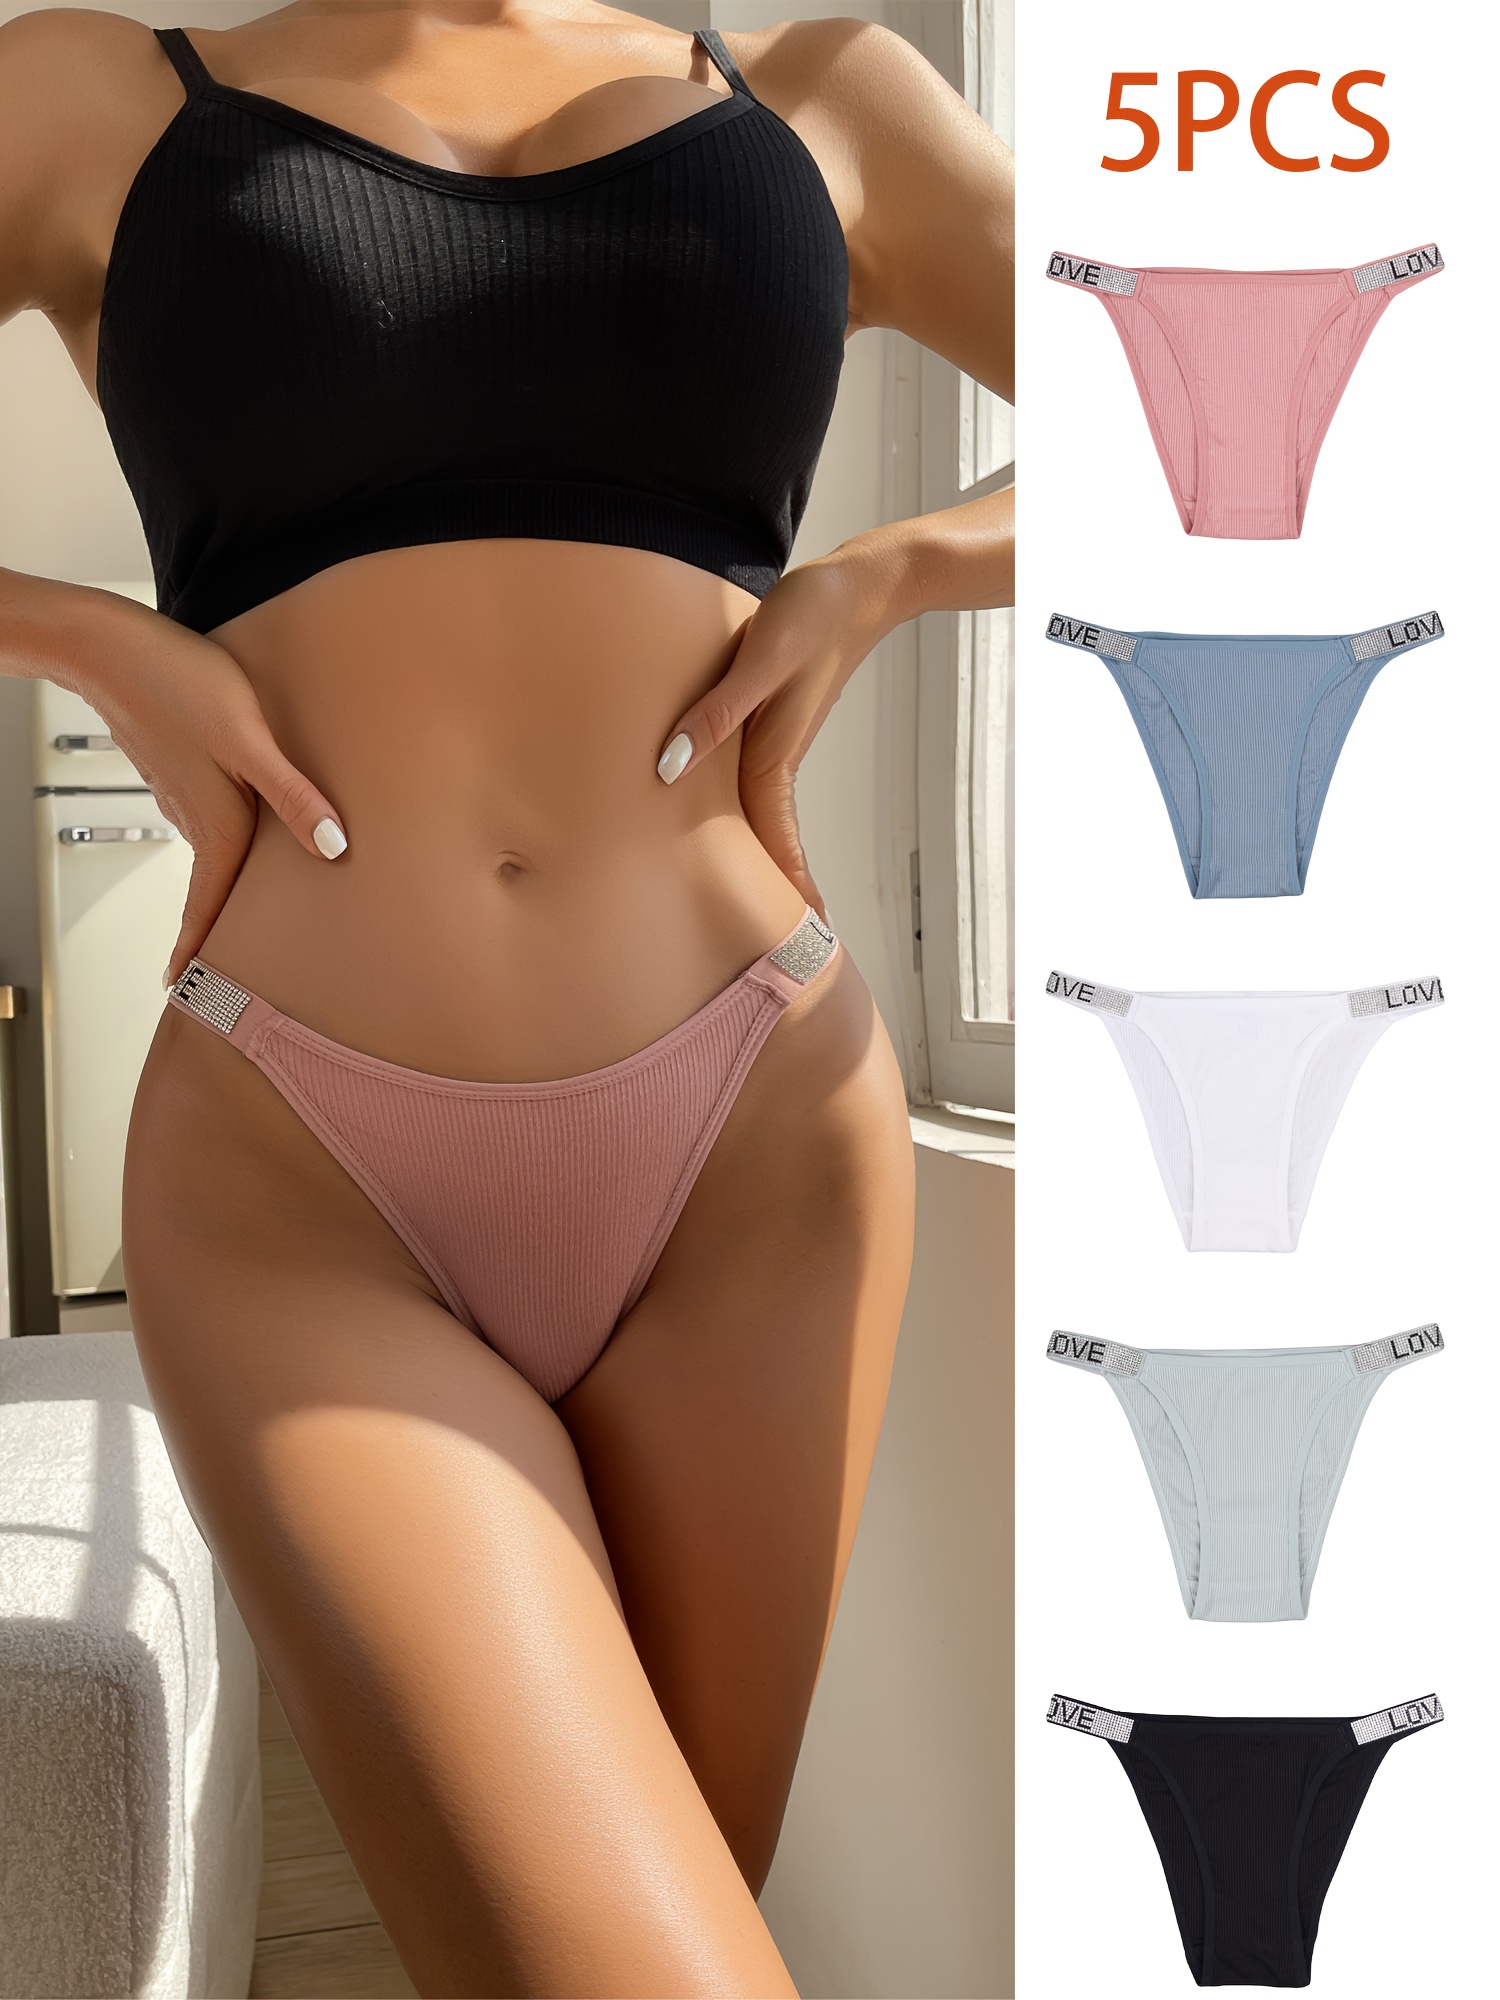 1 Pc Sexy Thongs, Hot Letter Print Cheeky Seamless Intimates Panties,  Women's Lingerie & Underwear